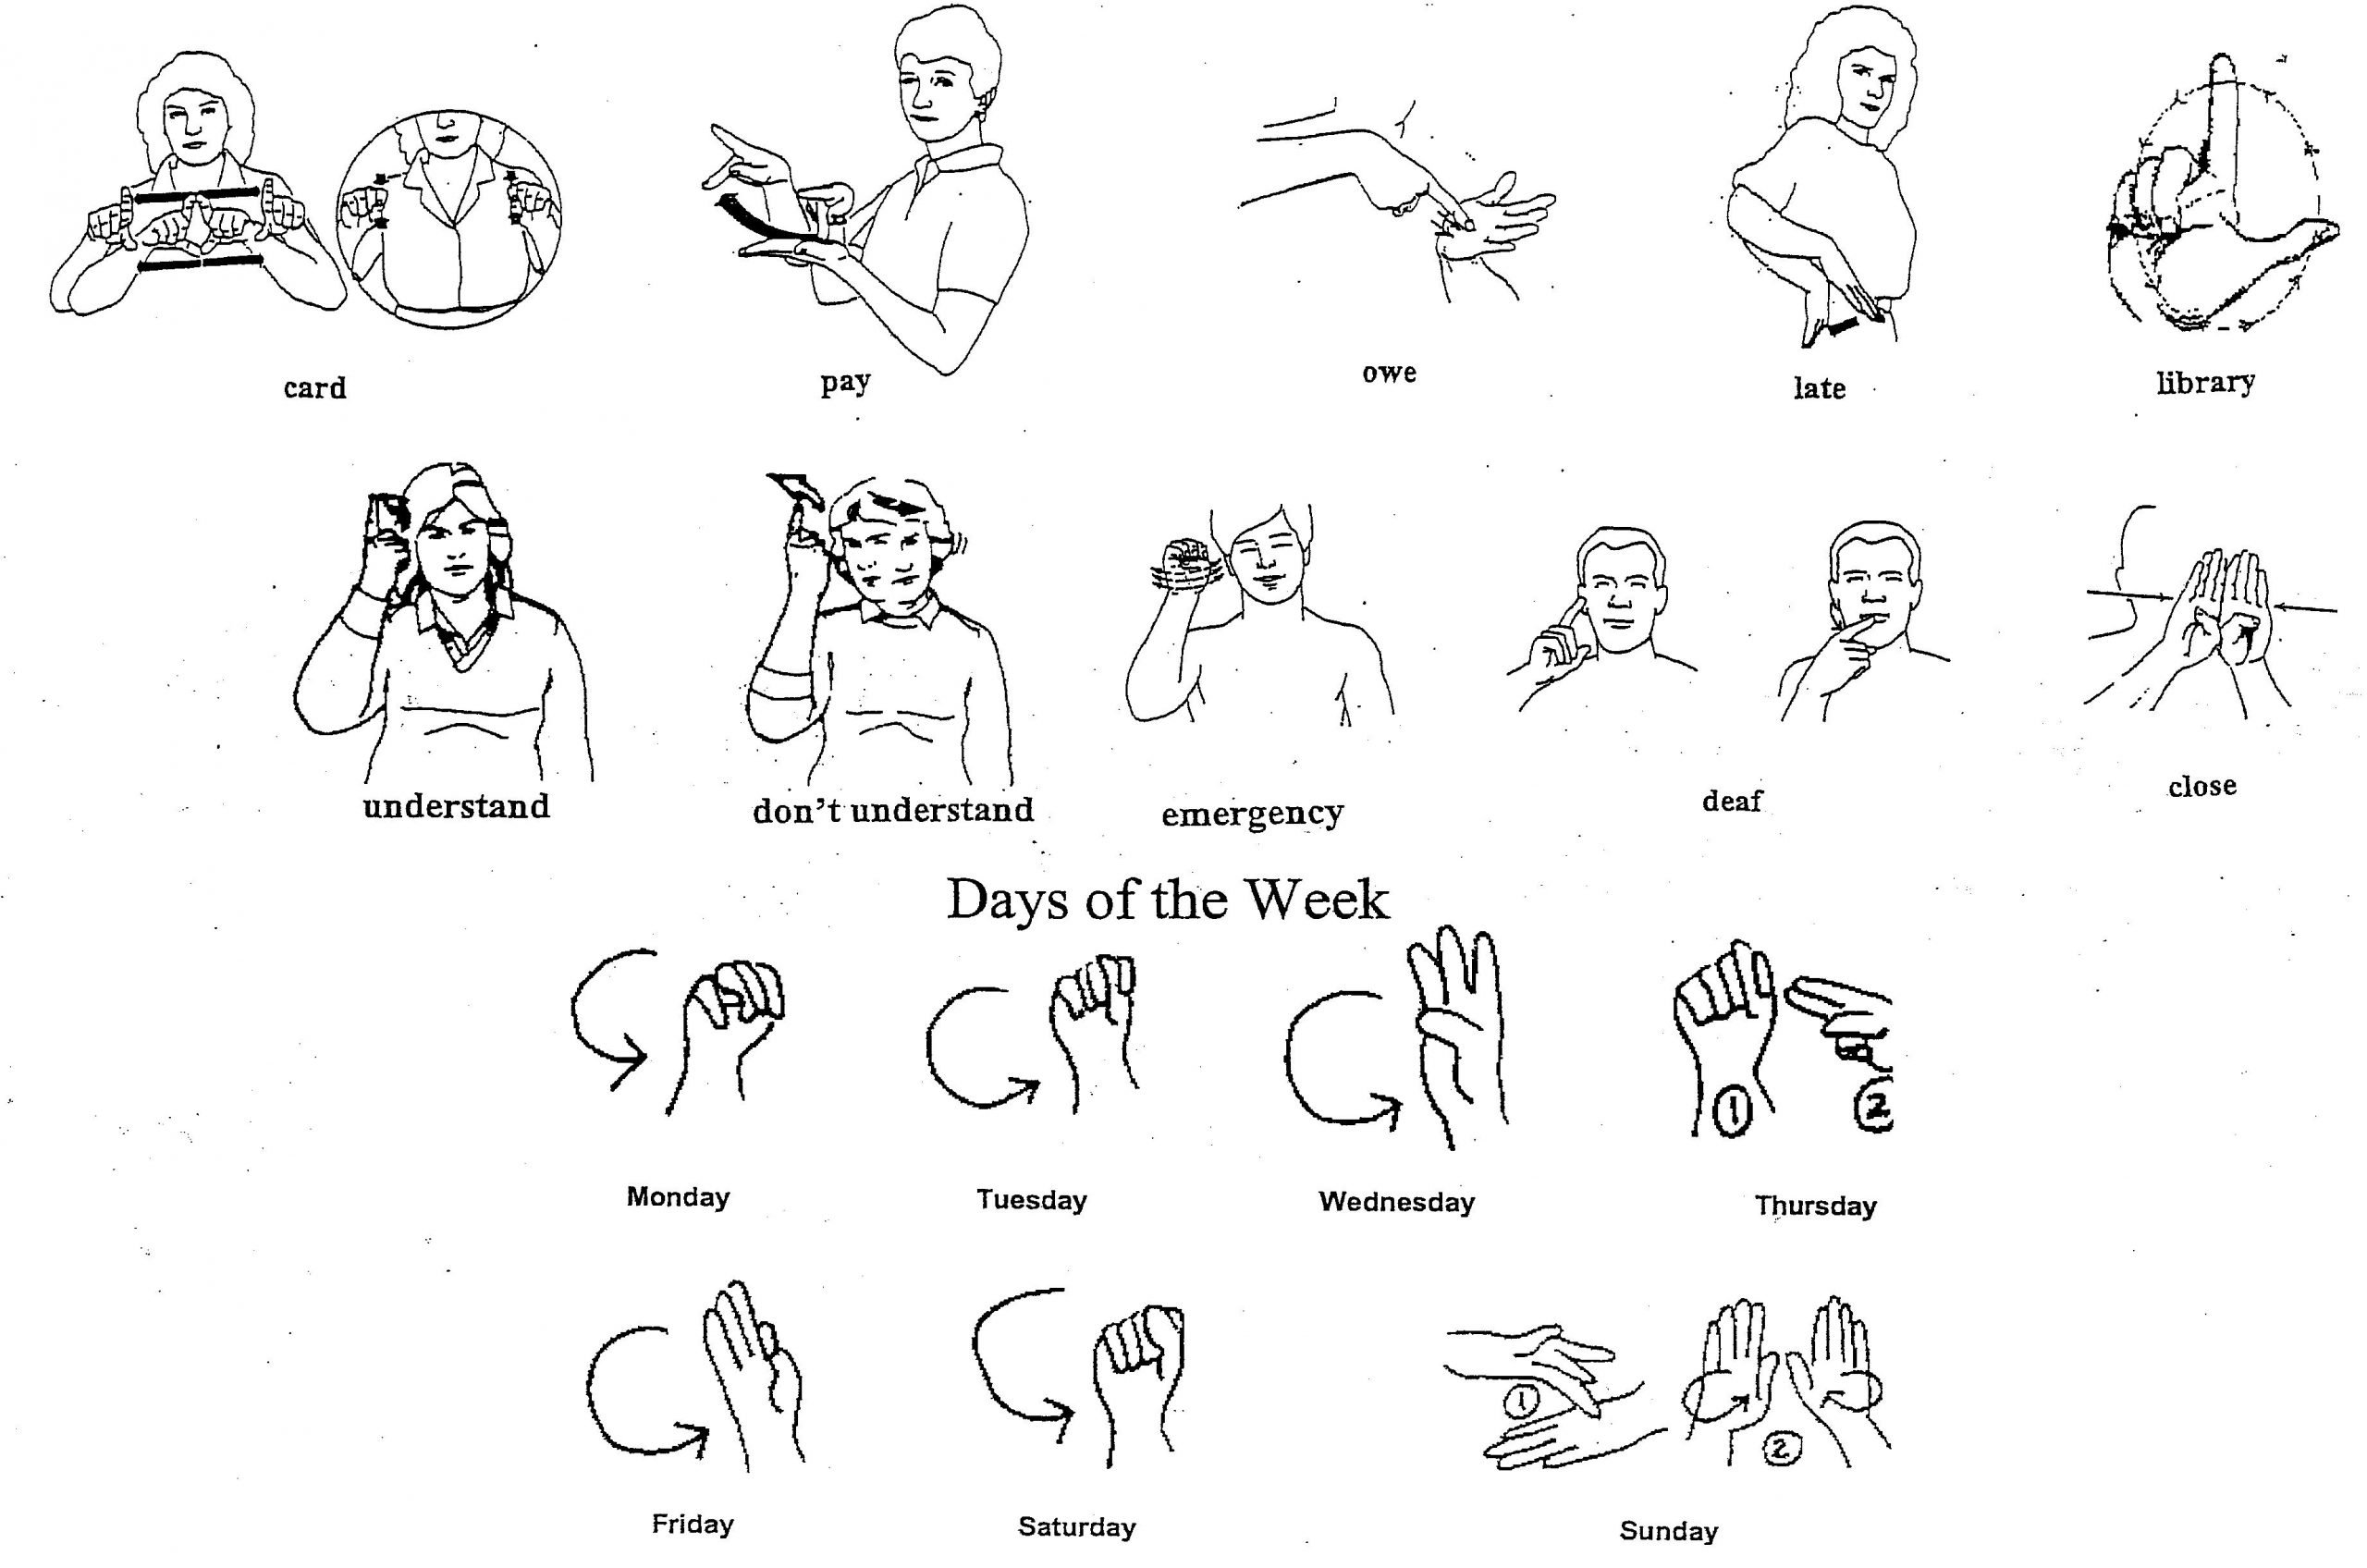 Should Sign Language Be Taught As a Foreign Language? at ...